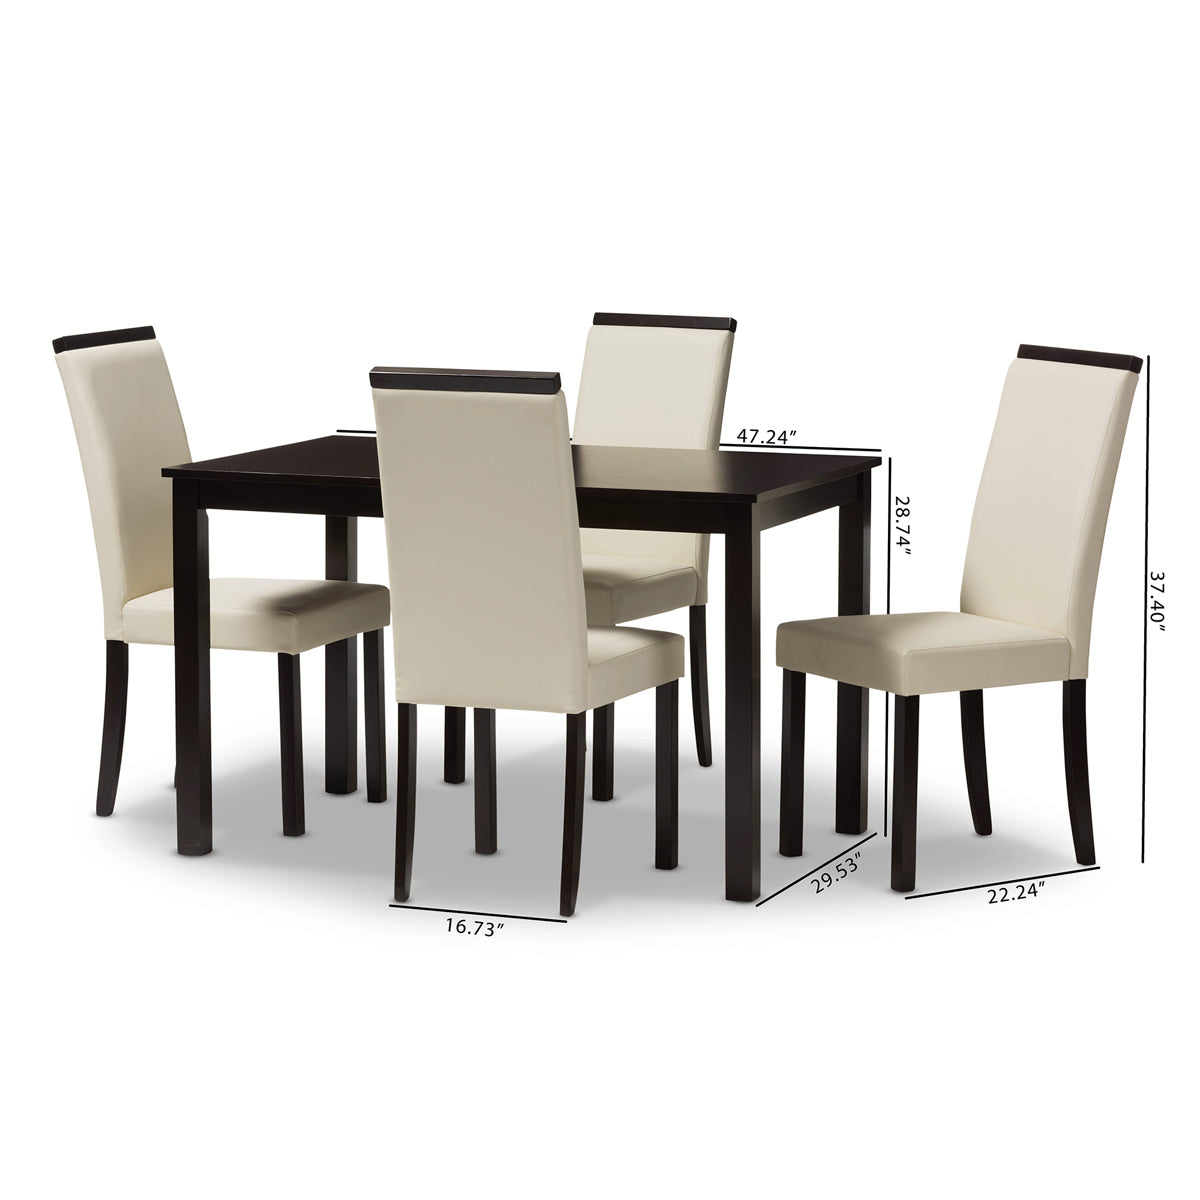 Baxton Studio Daveney Modern and Contemporary Cream Faux Leather Upholstered 5-Piece Dining Set Baxton Studio-0-Minimal And Modern - 6